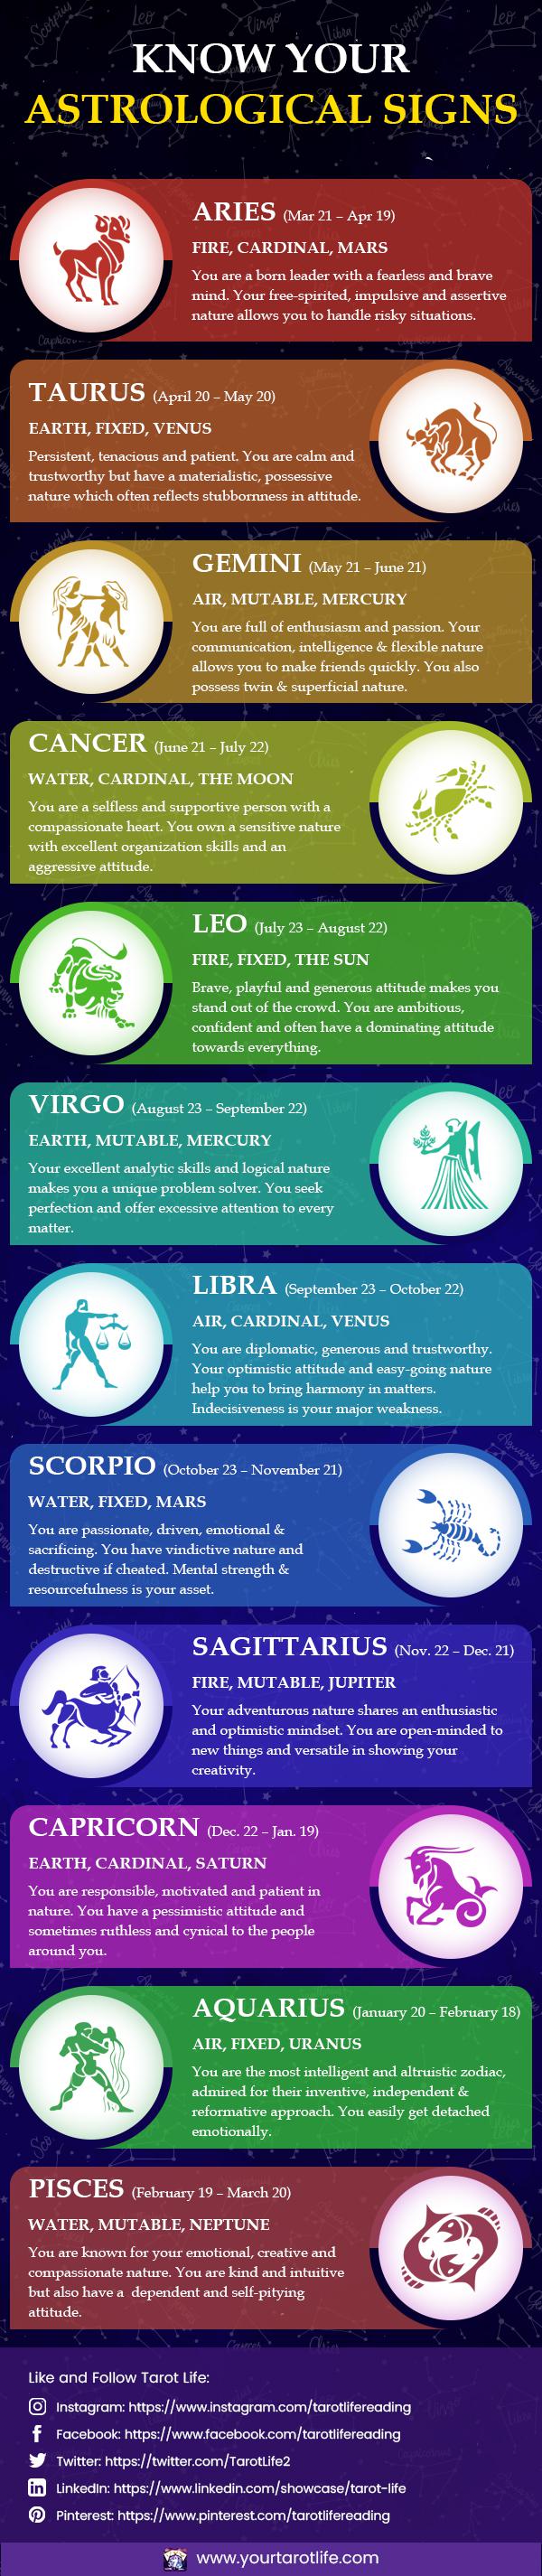 What Are Astrological Signs? 